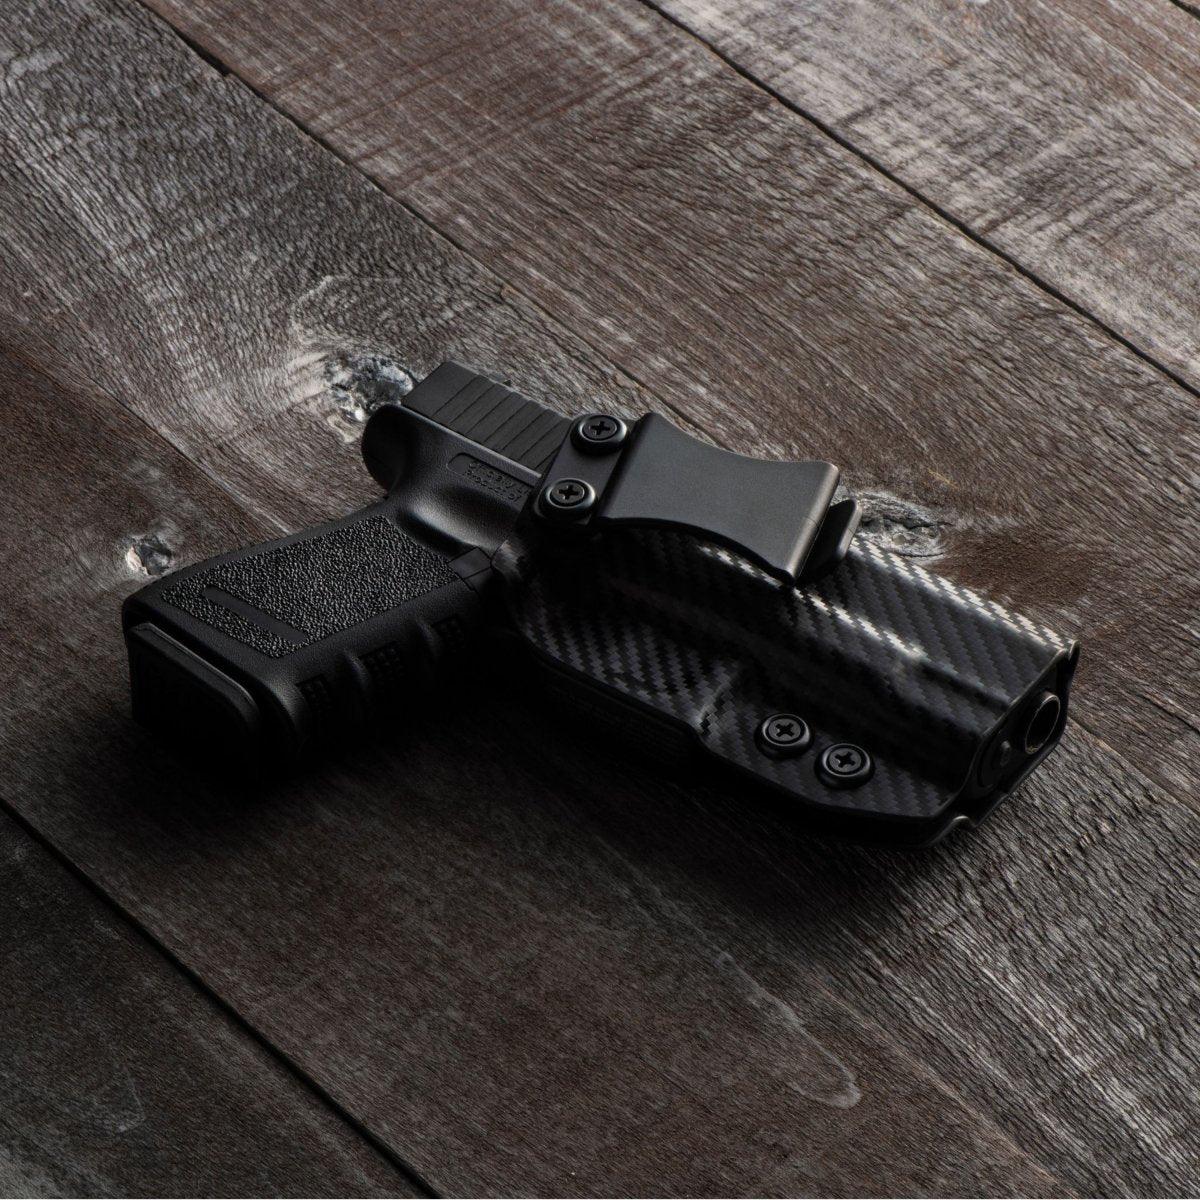 Most Popular Types of Concealed Carry Holsters - RoundedGear.com